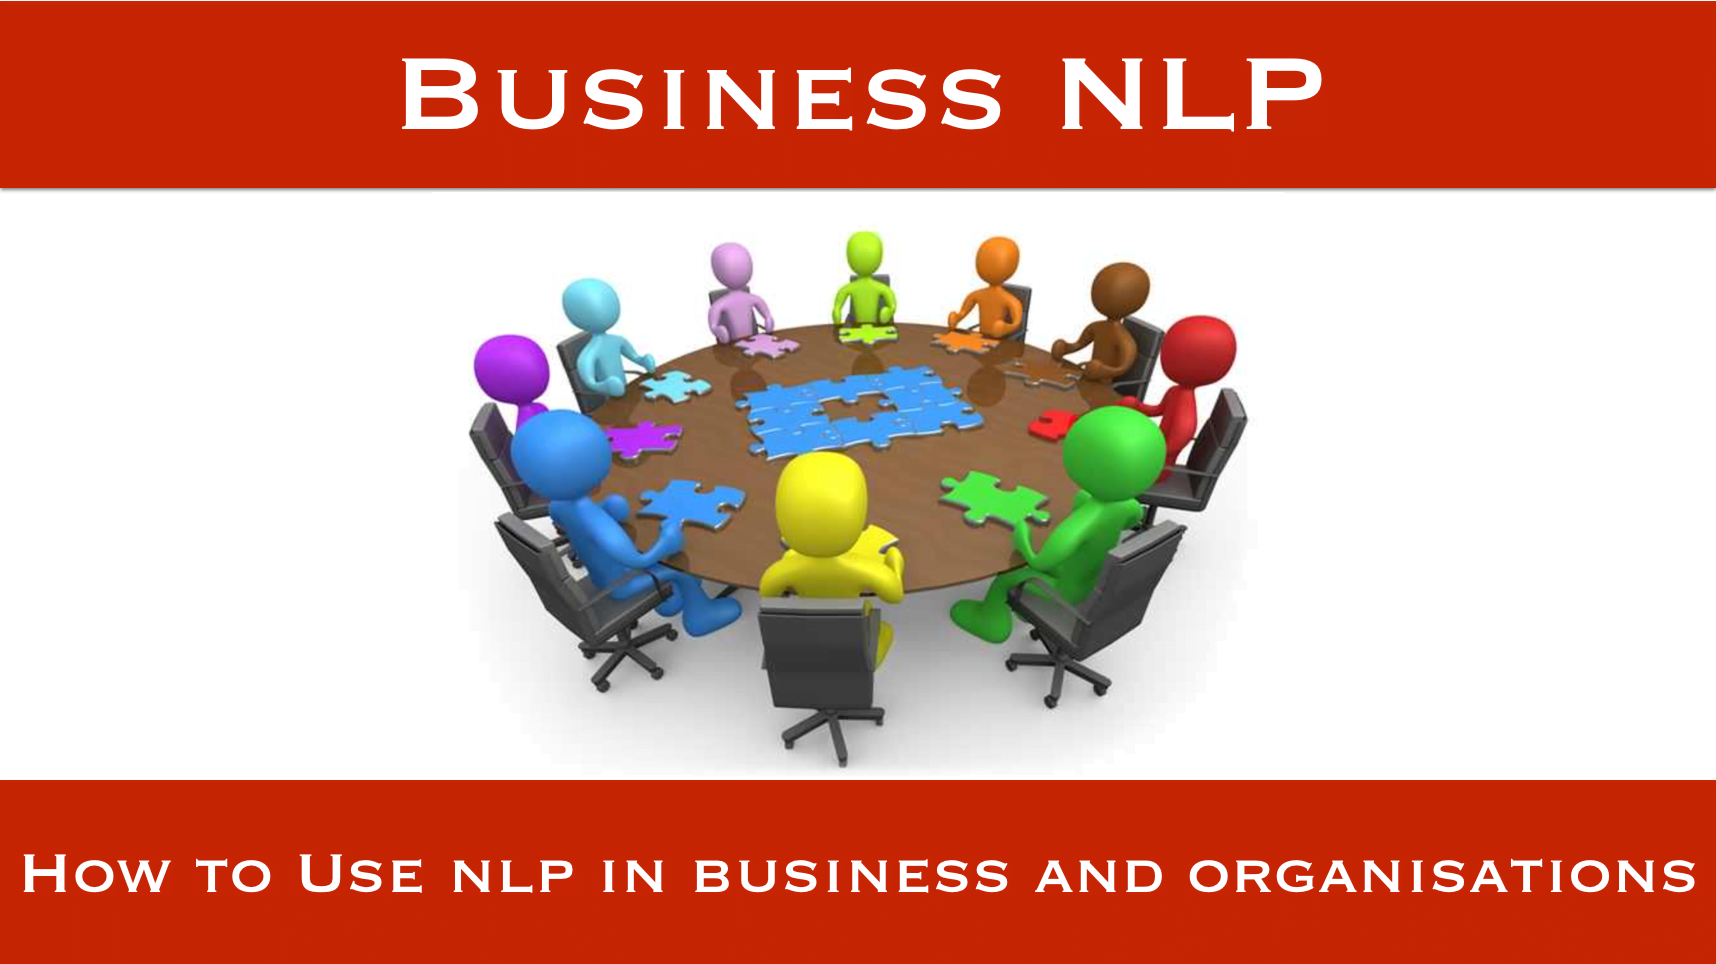 Business NLP - Benefits of using NLP in business and organisations